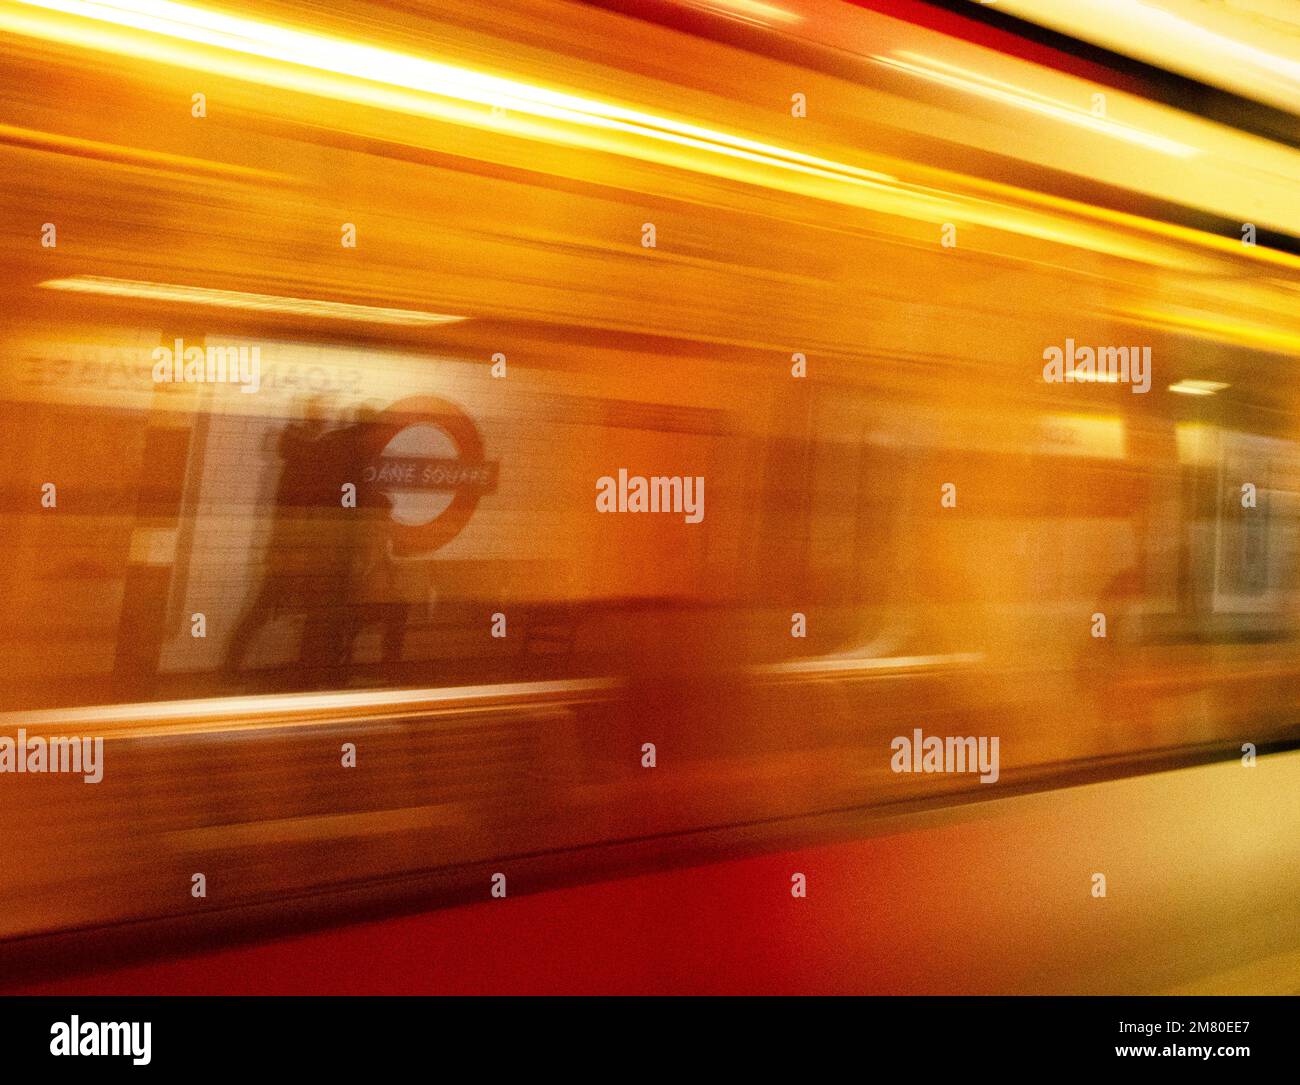 London Underground Sloane Square station, run by Tfl (Transport for London); tube train arriving at high speed, the image blurred Stock Photo